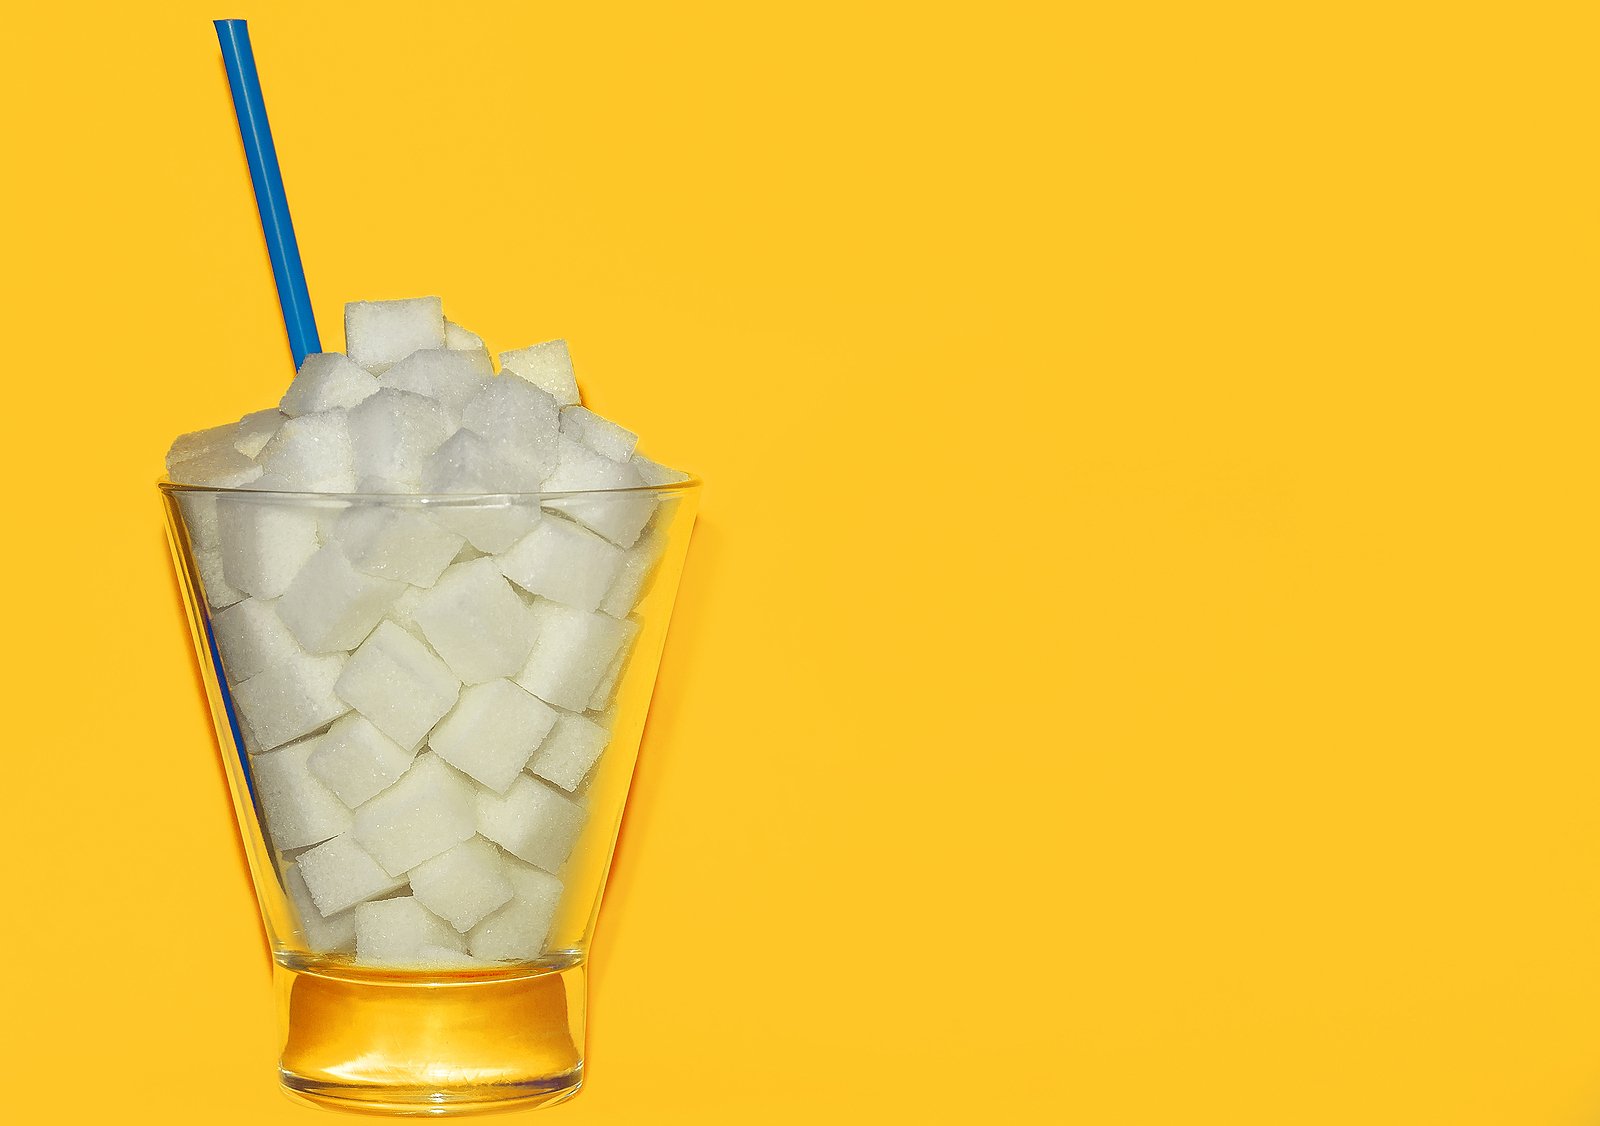 Don’t Eat More Than This Many Grams Of Sugar Per Day If You Want To Be Healthy